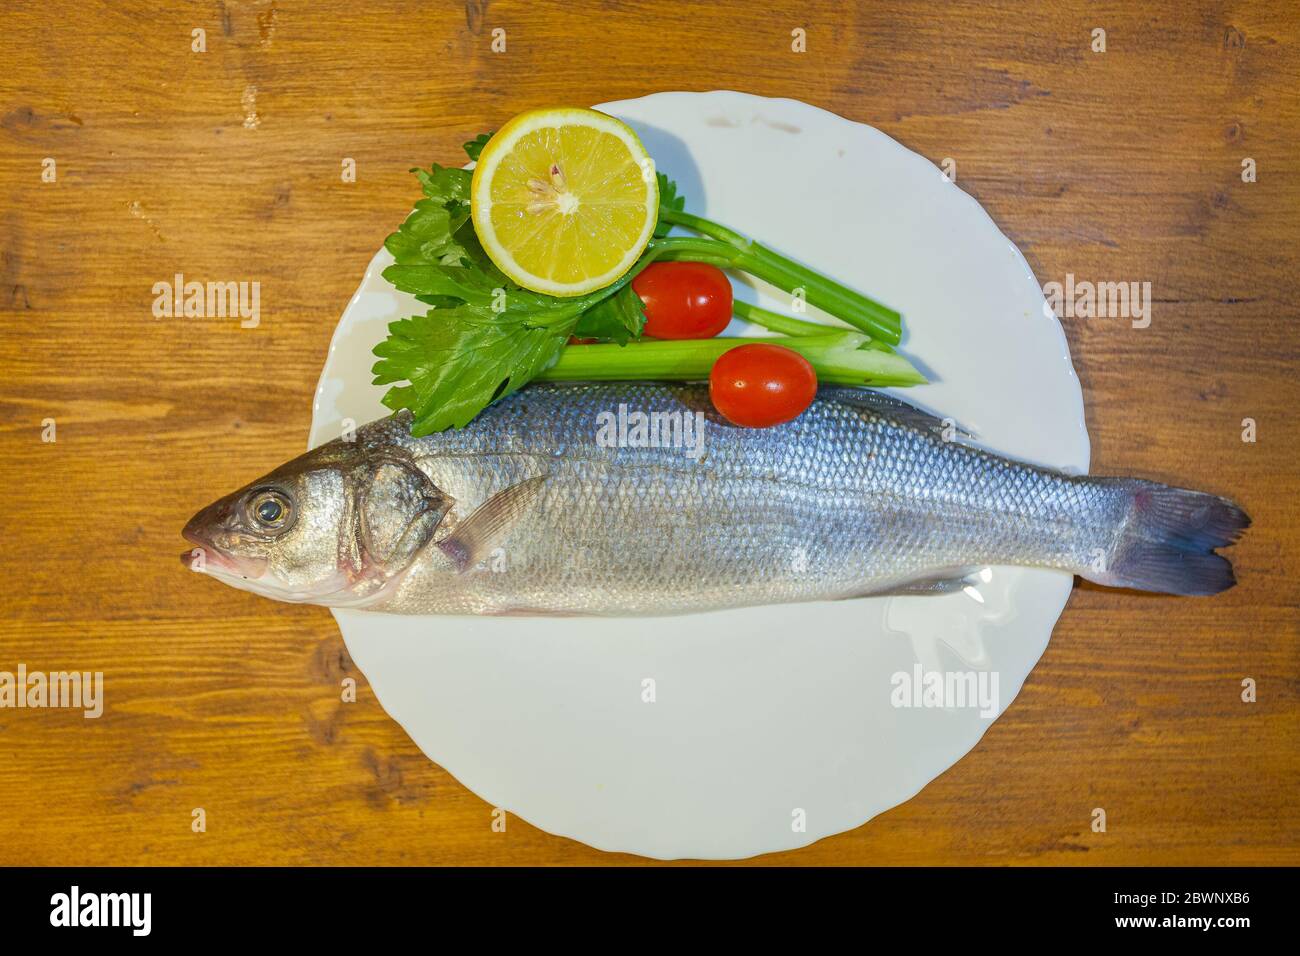 Dish with sea bass, lemon, celery and tomatoes on wooden background Stock Photo